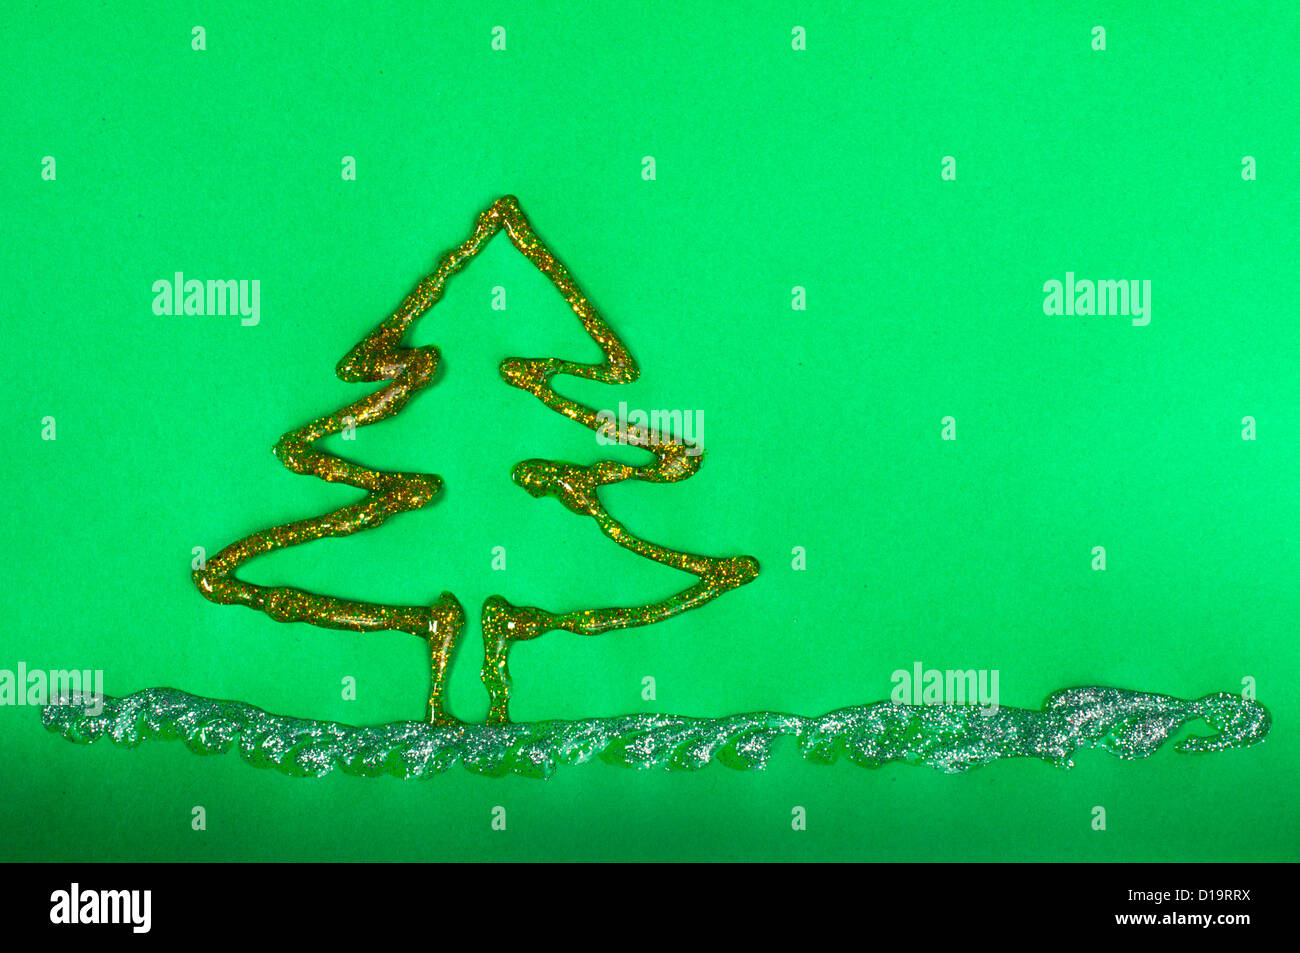 Christmas tree made of shiny gel over green paper Stock Photo